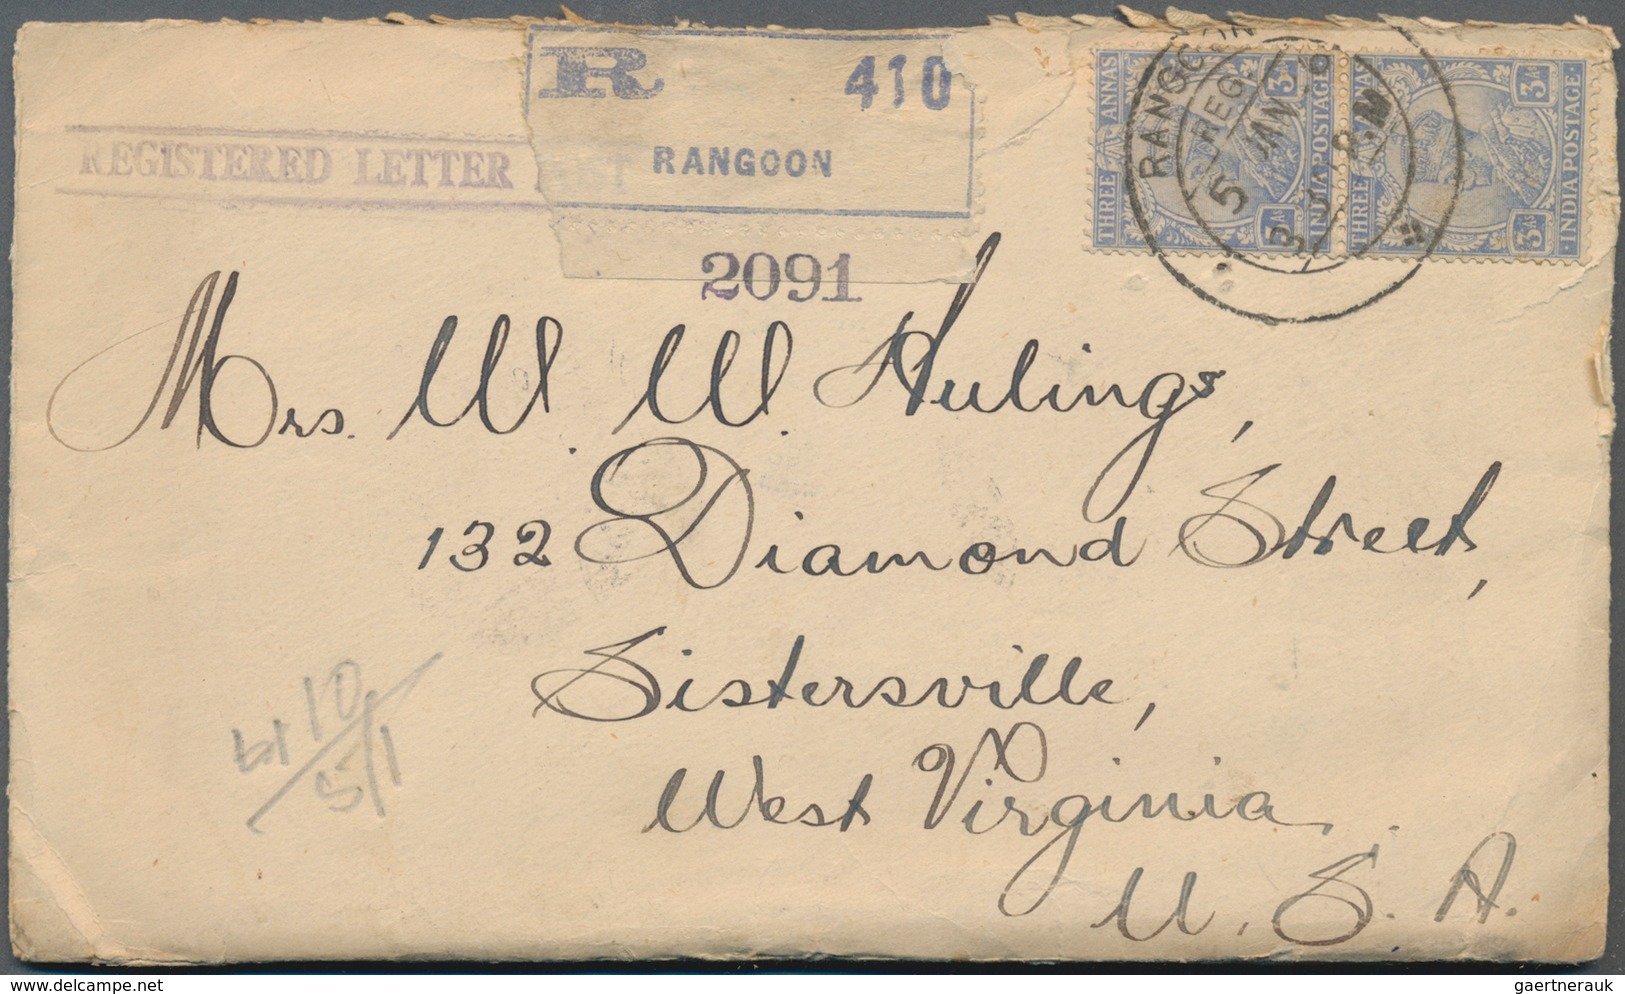 Indien - Used Abroad - Burma: BURMA 1856-1930's: More than 800 covers, postcards, postal stationery